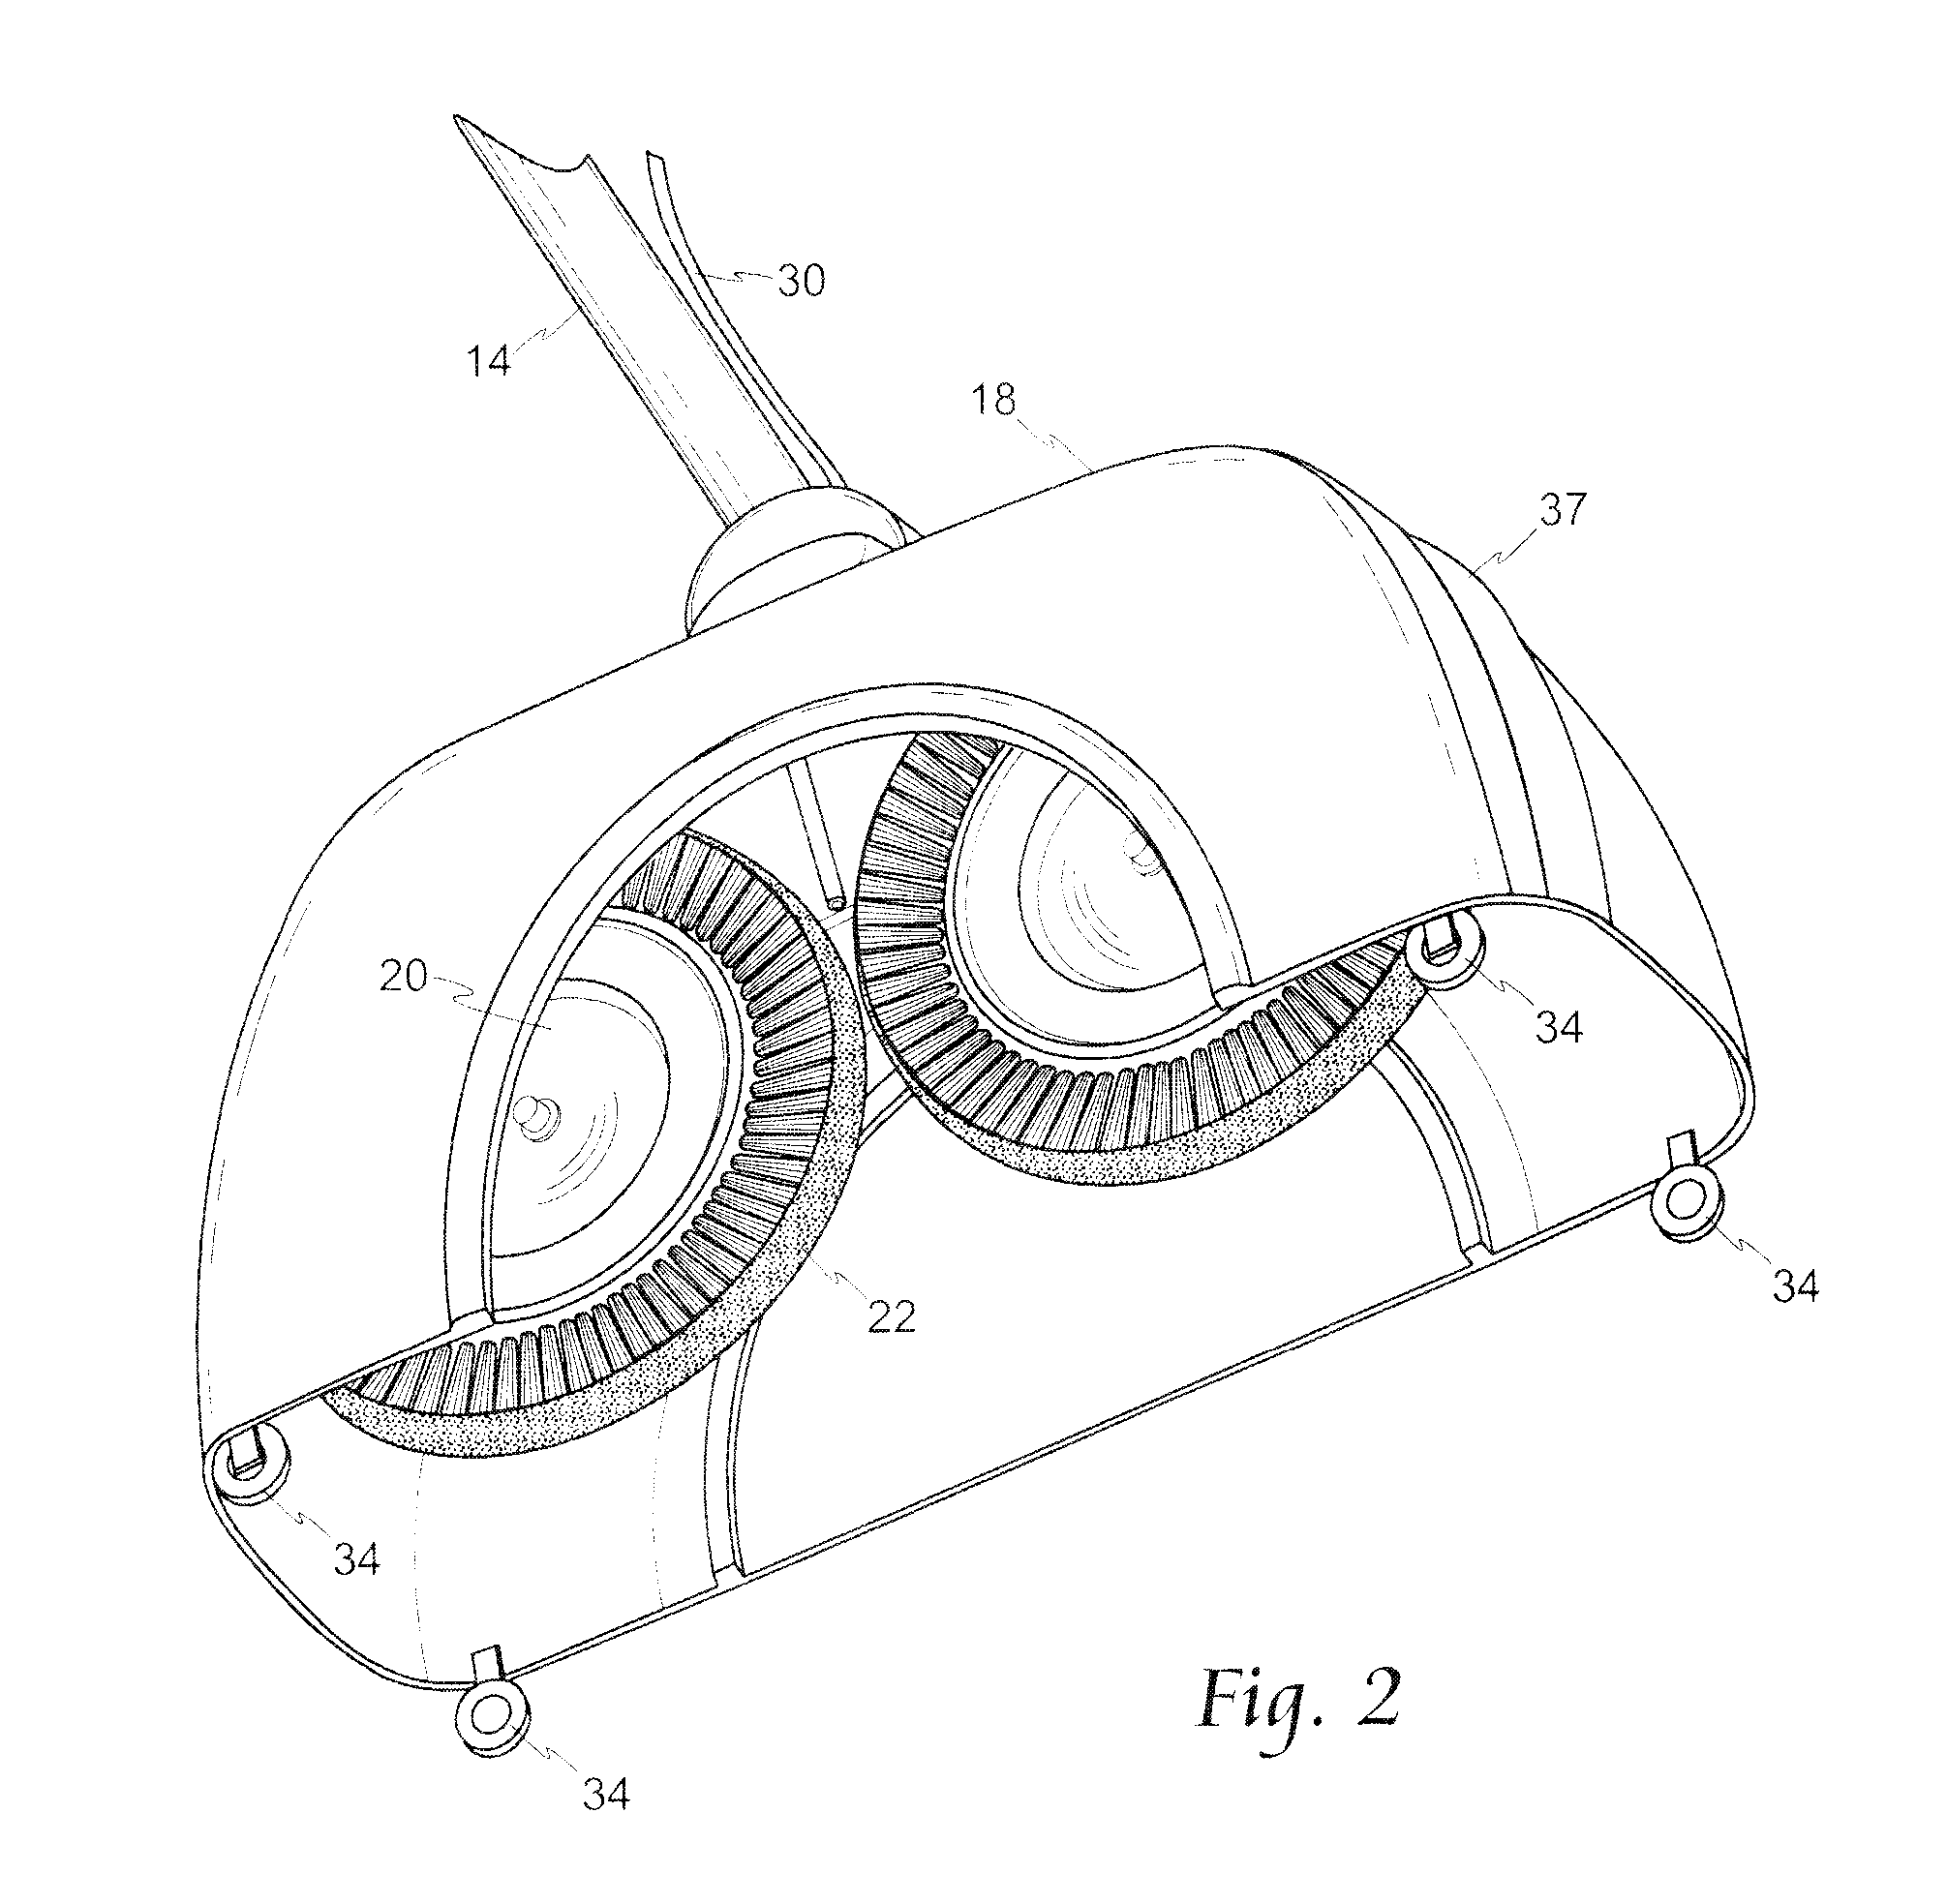 Grout cleaning apparatus